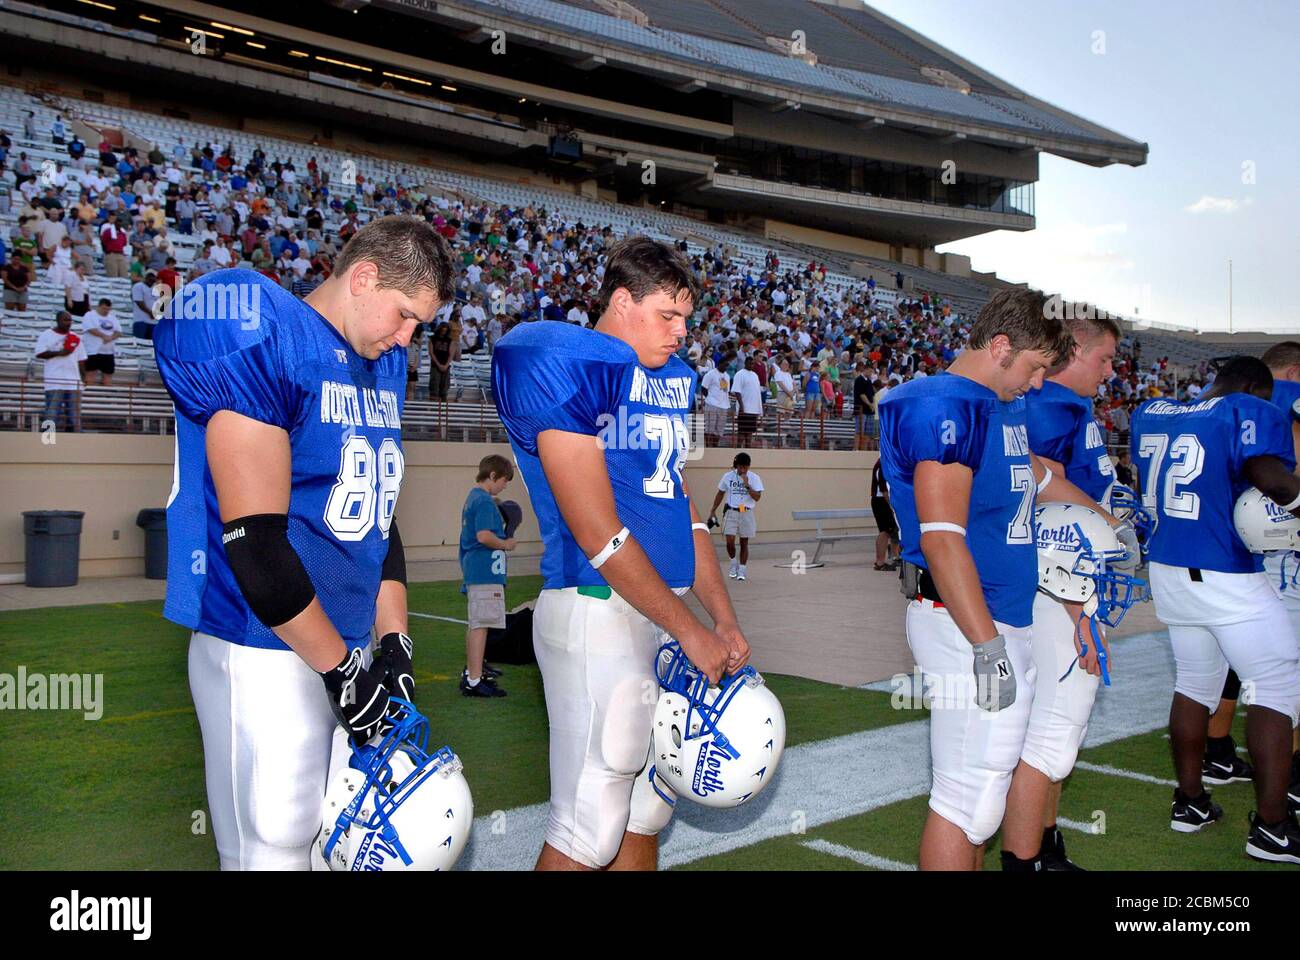 Austin, Texas August 2, 2006: Texas high school football season opens with the High School Coaches Assn. All-Star Game in Austin, featuring the best of the previous season's graduated seniors in the Lone Star State. Most of the players are headed to college football programs in the fall as freshmen. ©Bob Daemmrich Stock Photo